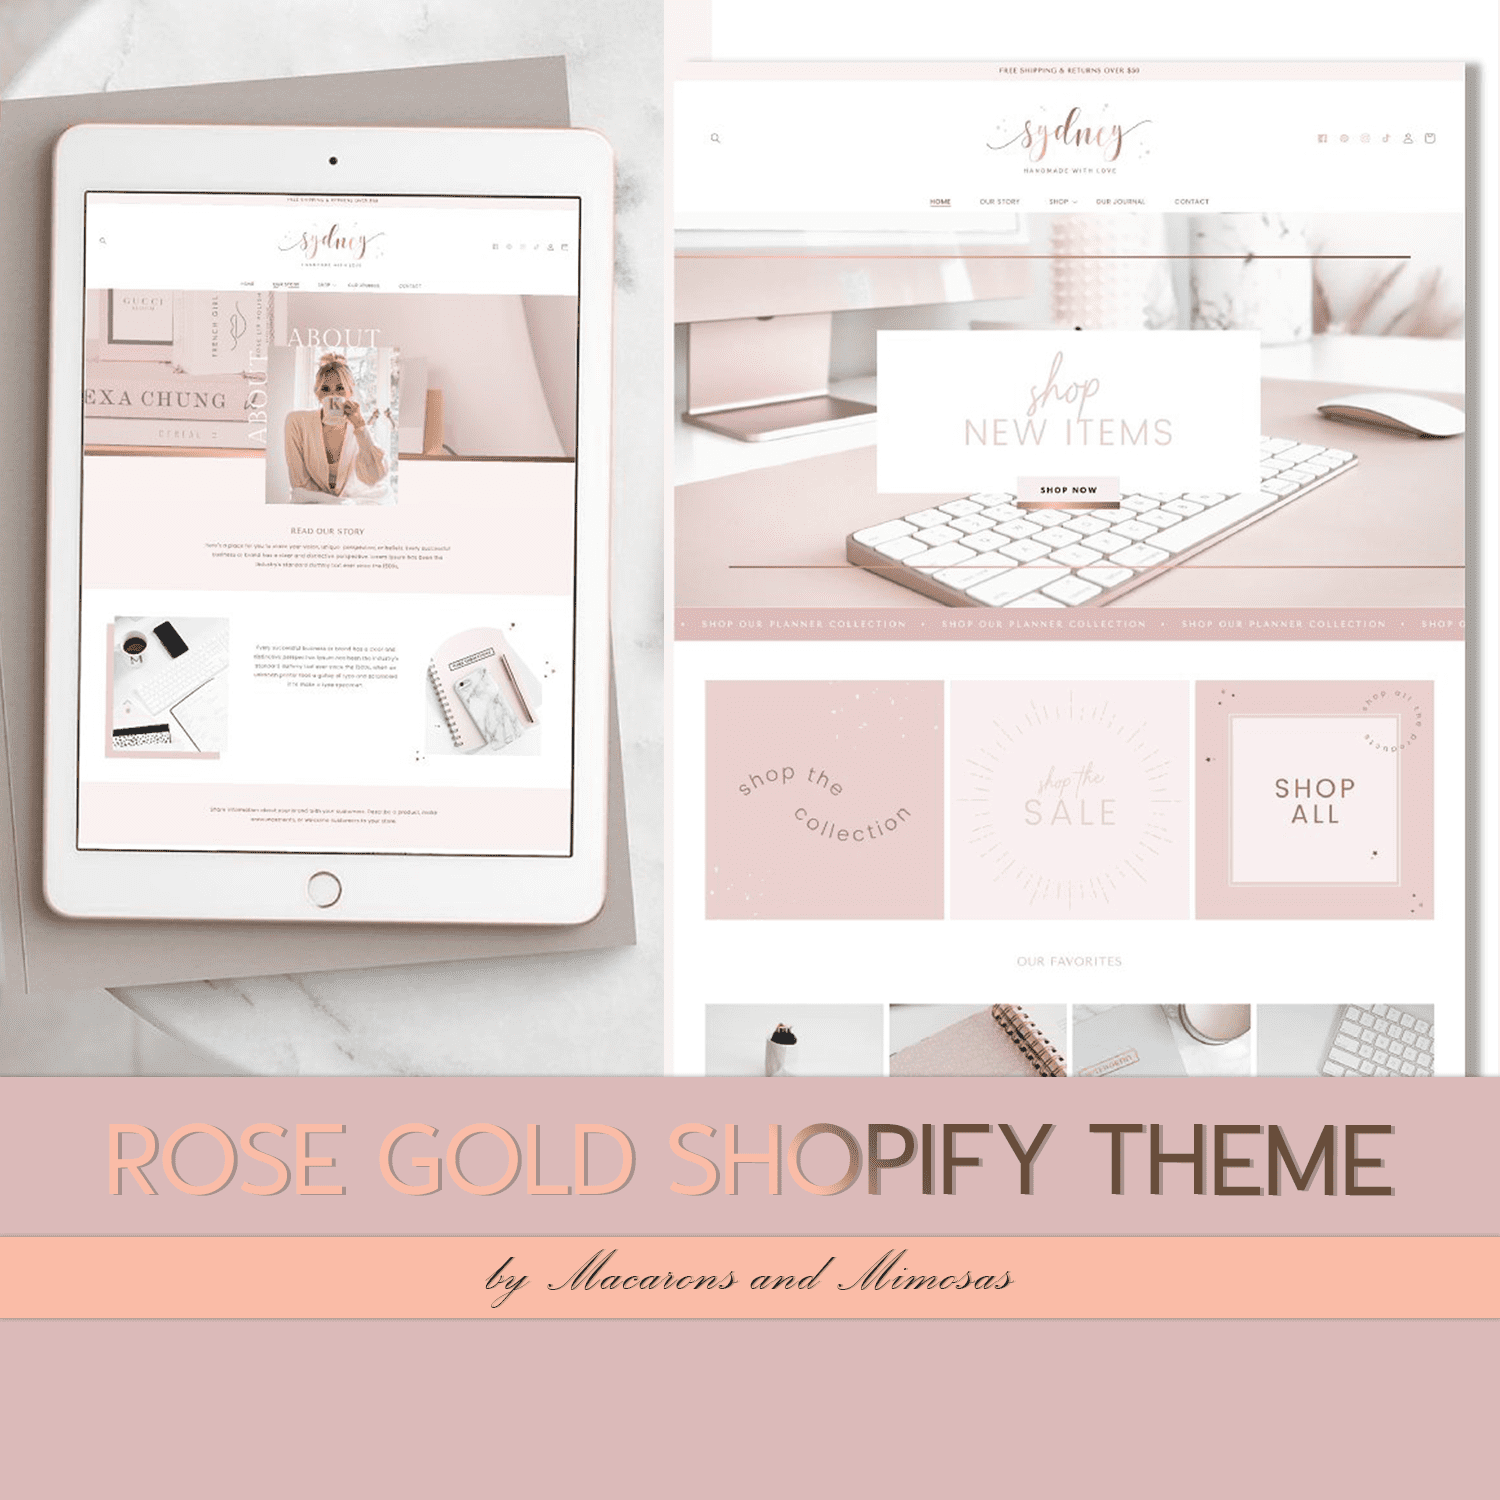 Rose Gold Shopify Theme from Macarons and Mimosas.